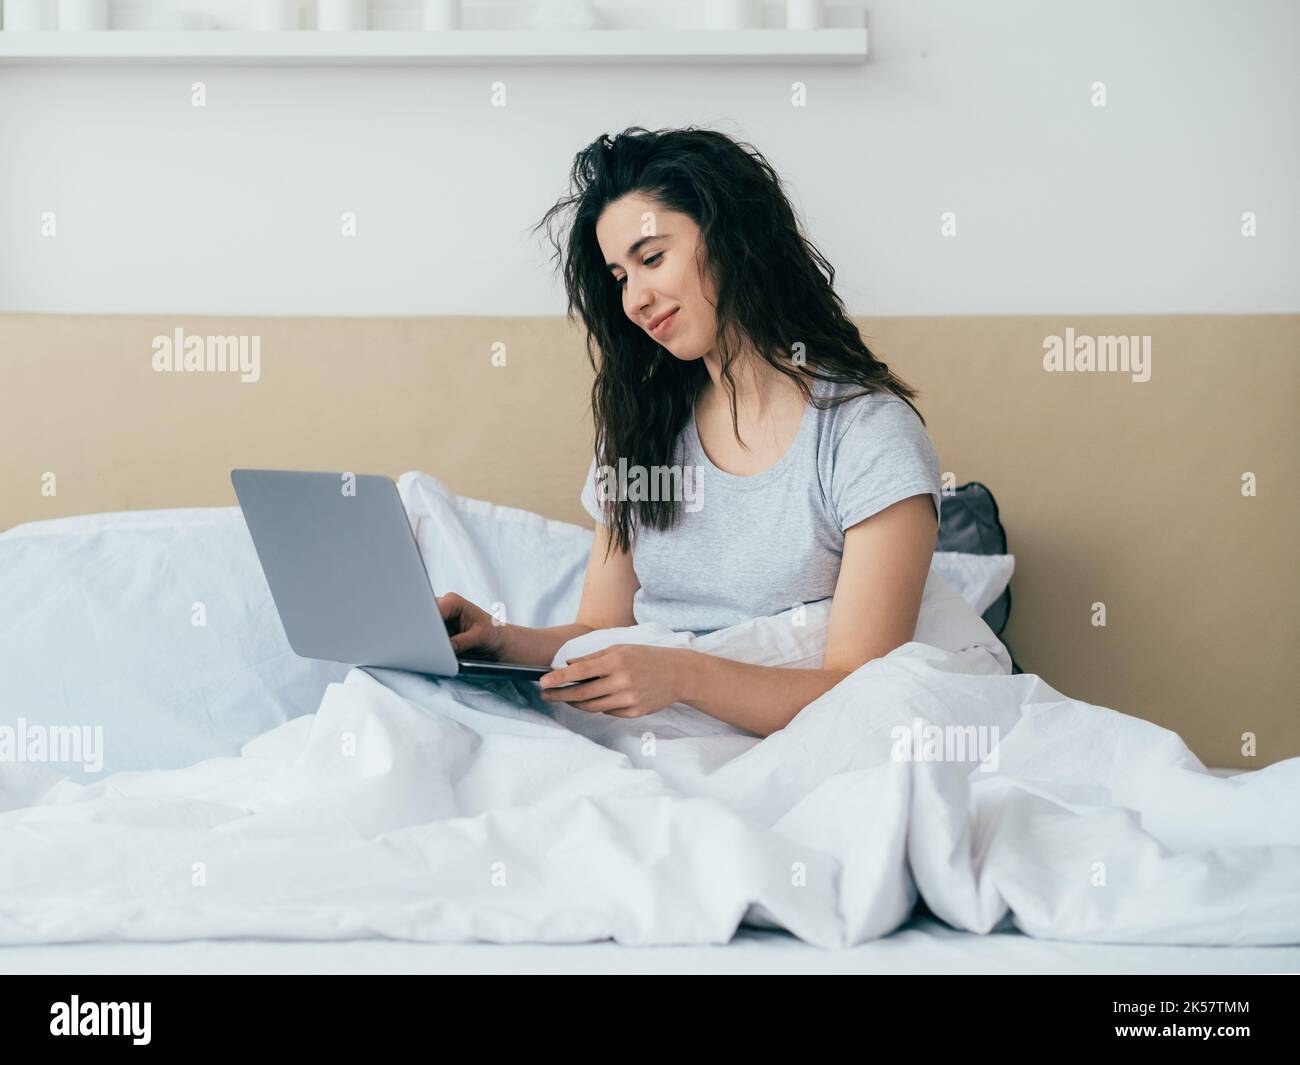 Morning chat. Online communication. Modern technology. Home leisure. Relaxed happy woman enjoying reading message using laptop in bed in light bedroom Stock Photo